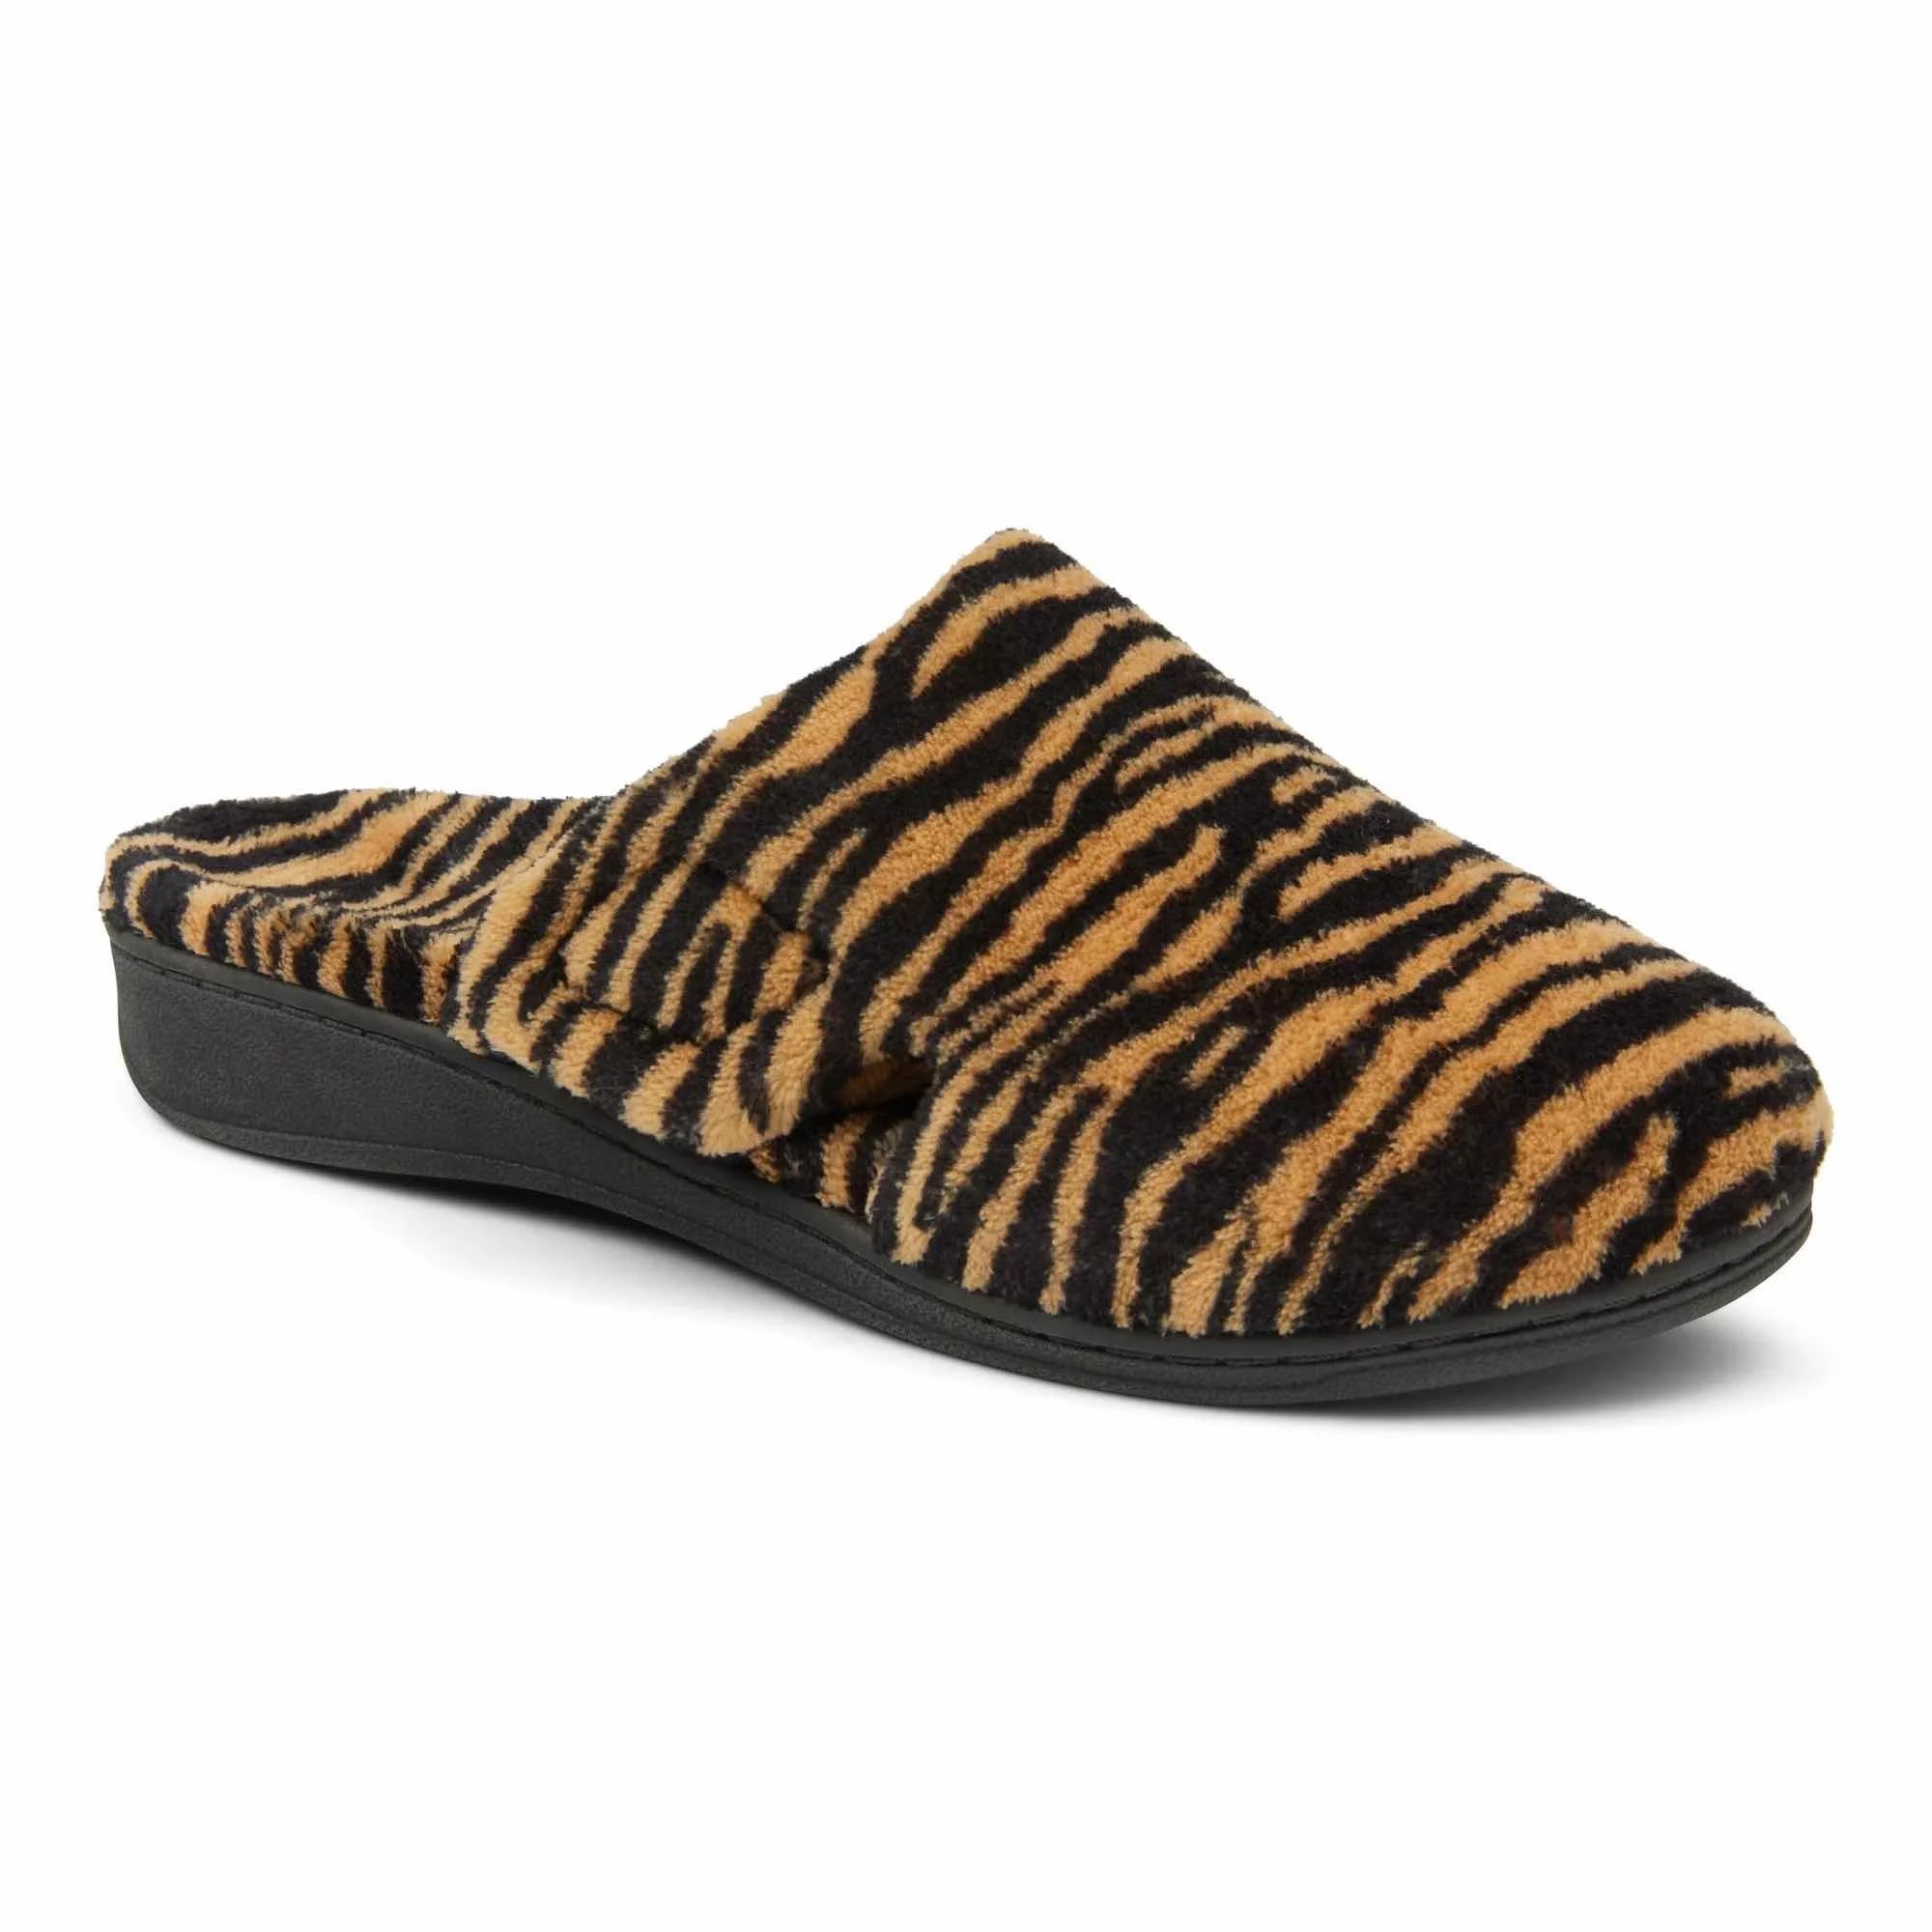 Vionic Gemma Slipper, best slippers for arch support